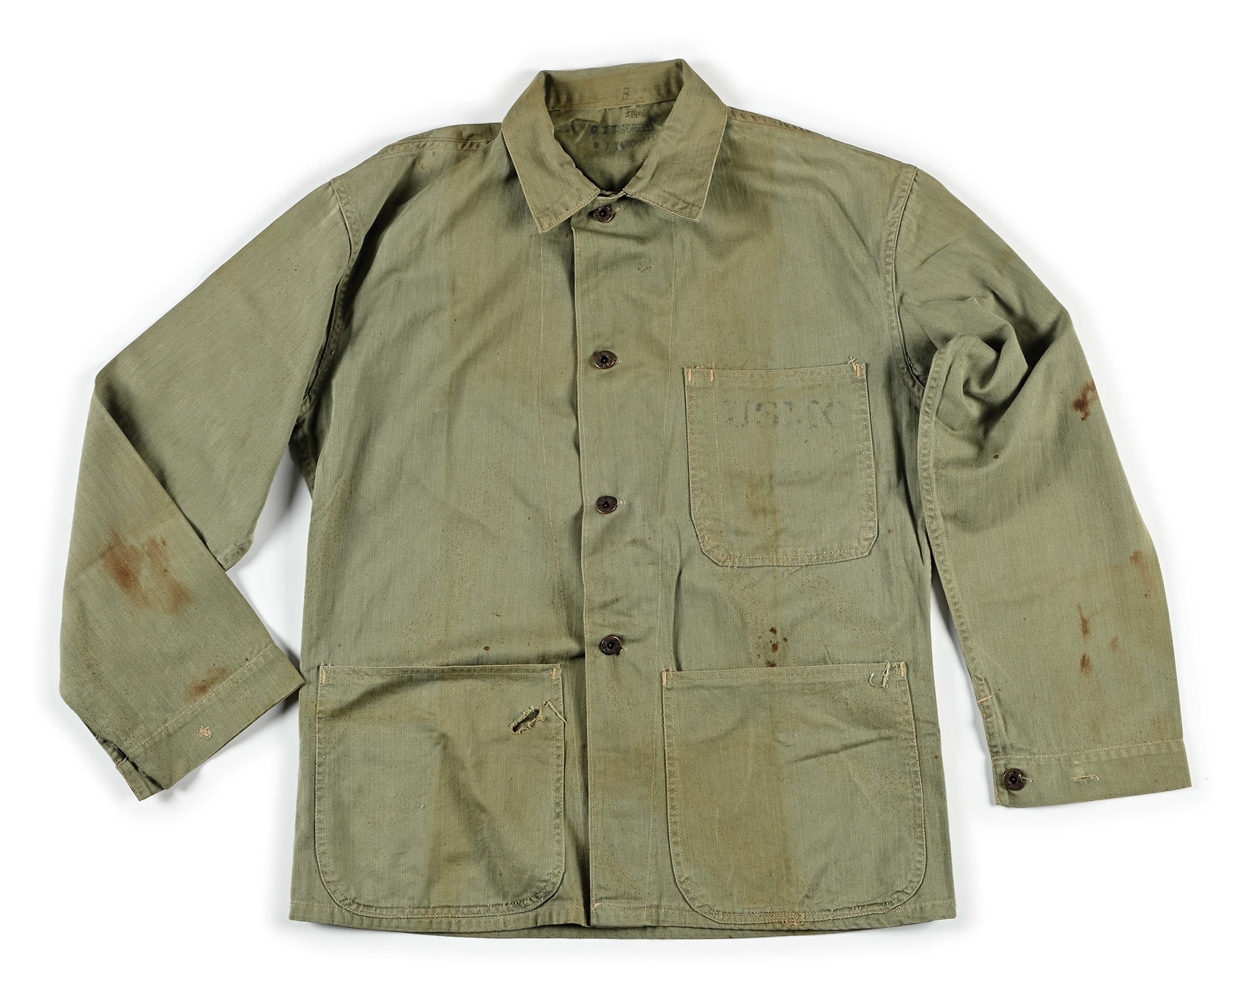 US WWII P41 FATIGUE JACKET NAMED TO OLIVER J. TABORELLI, 6TH MARINE DIVISION, WOUNDED AT OKINAWA.